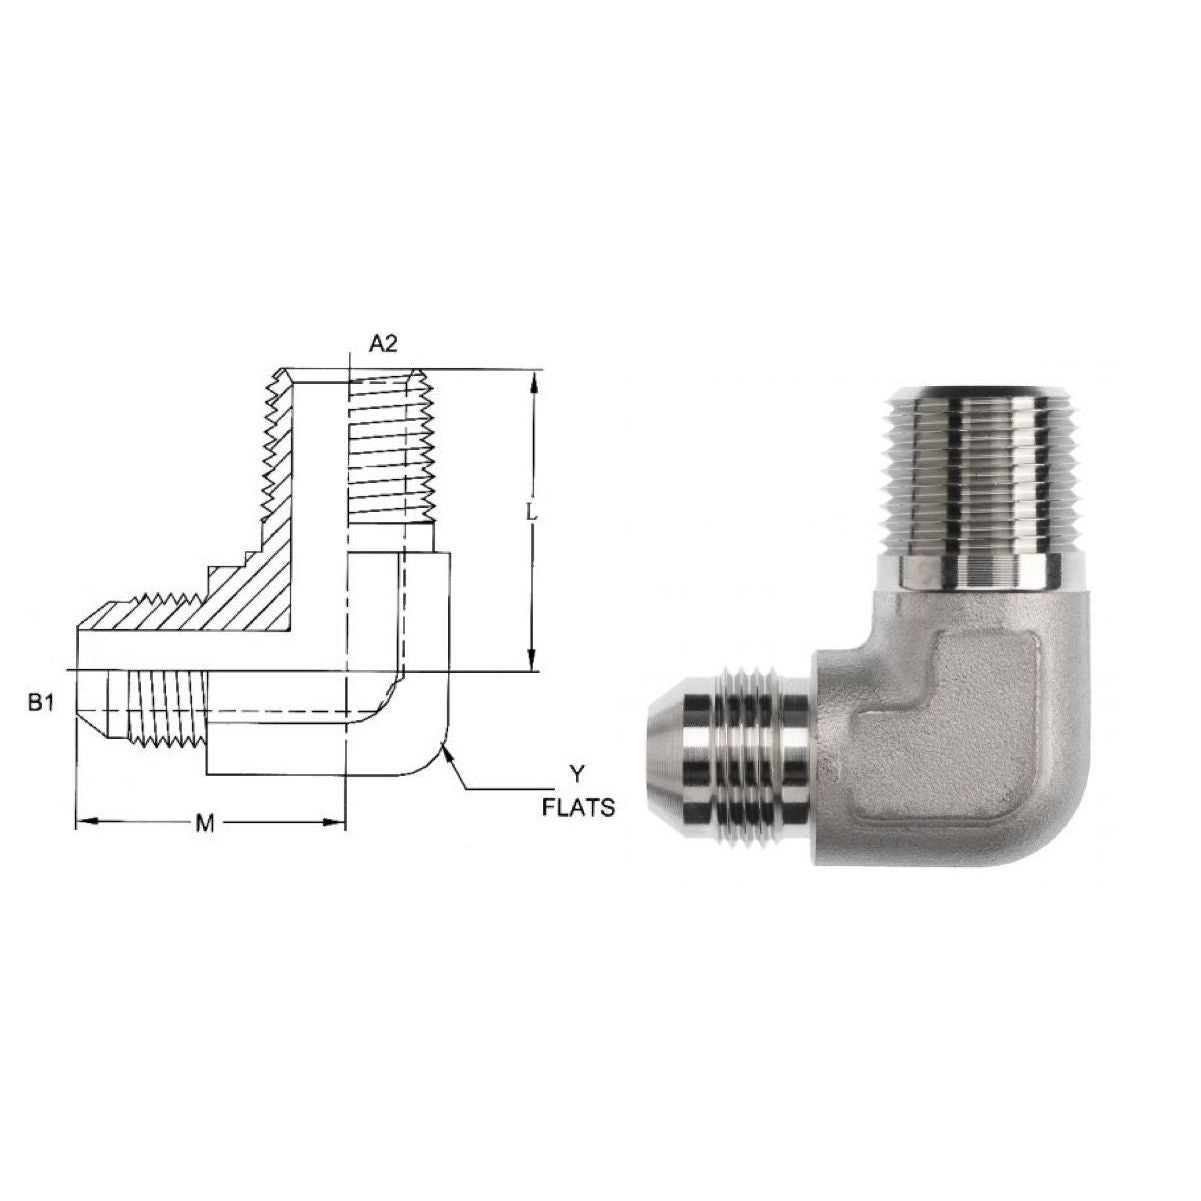 2501-10-12-SS : OneHydraulics 90-Degree Elbow, 0.625 (5/8) Male JIC x 0.75 (3/4) Male NPT, Stainless Steel, 6000psi